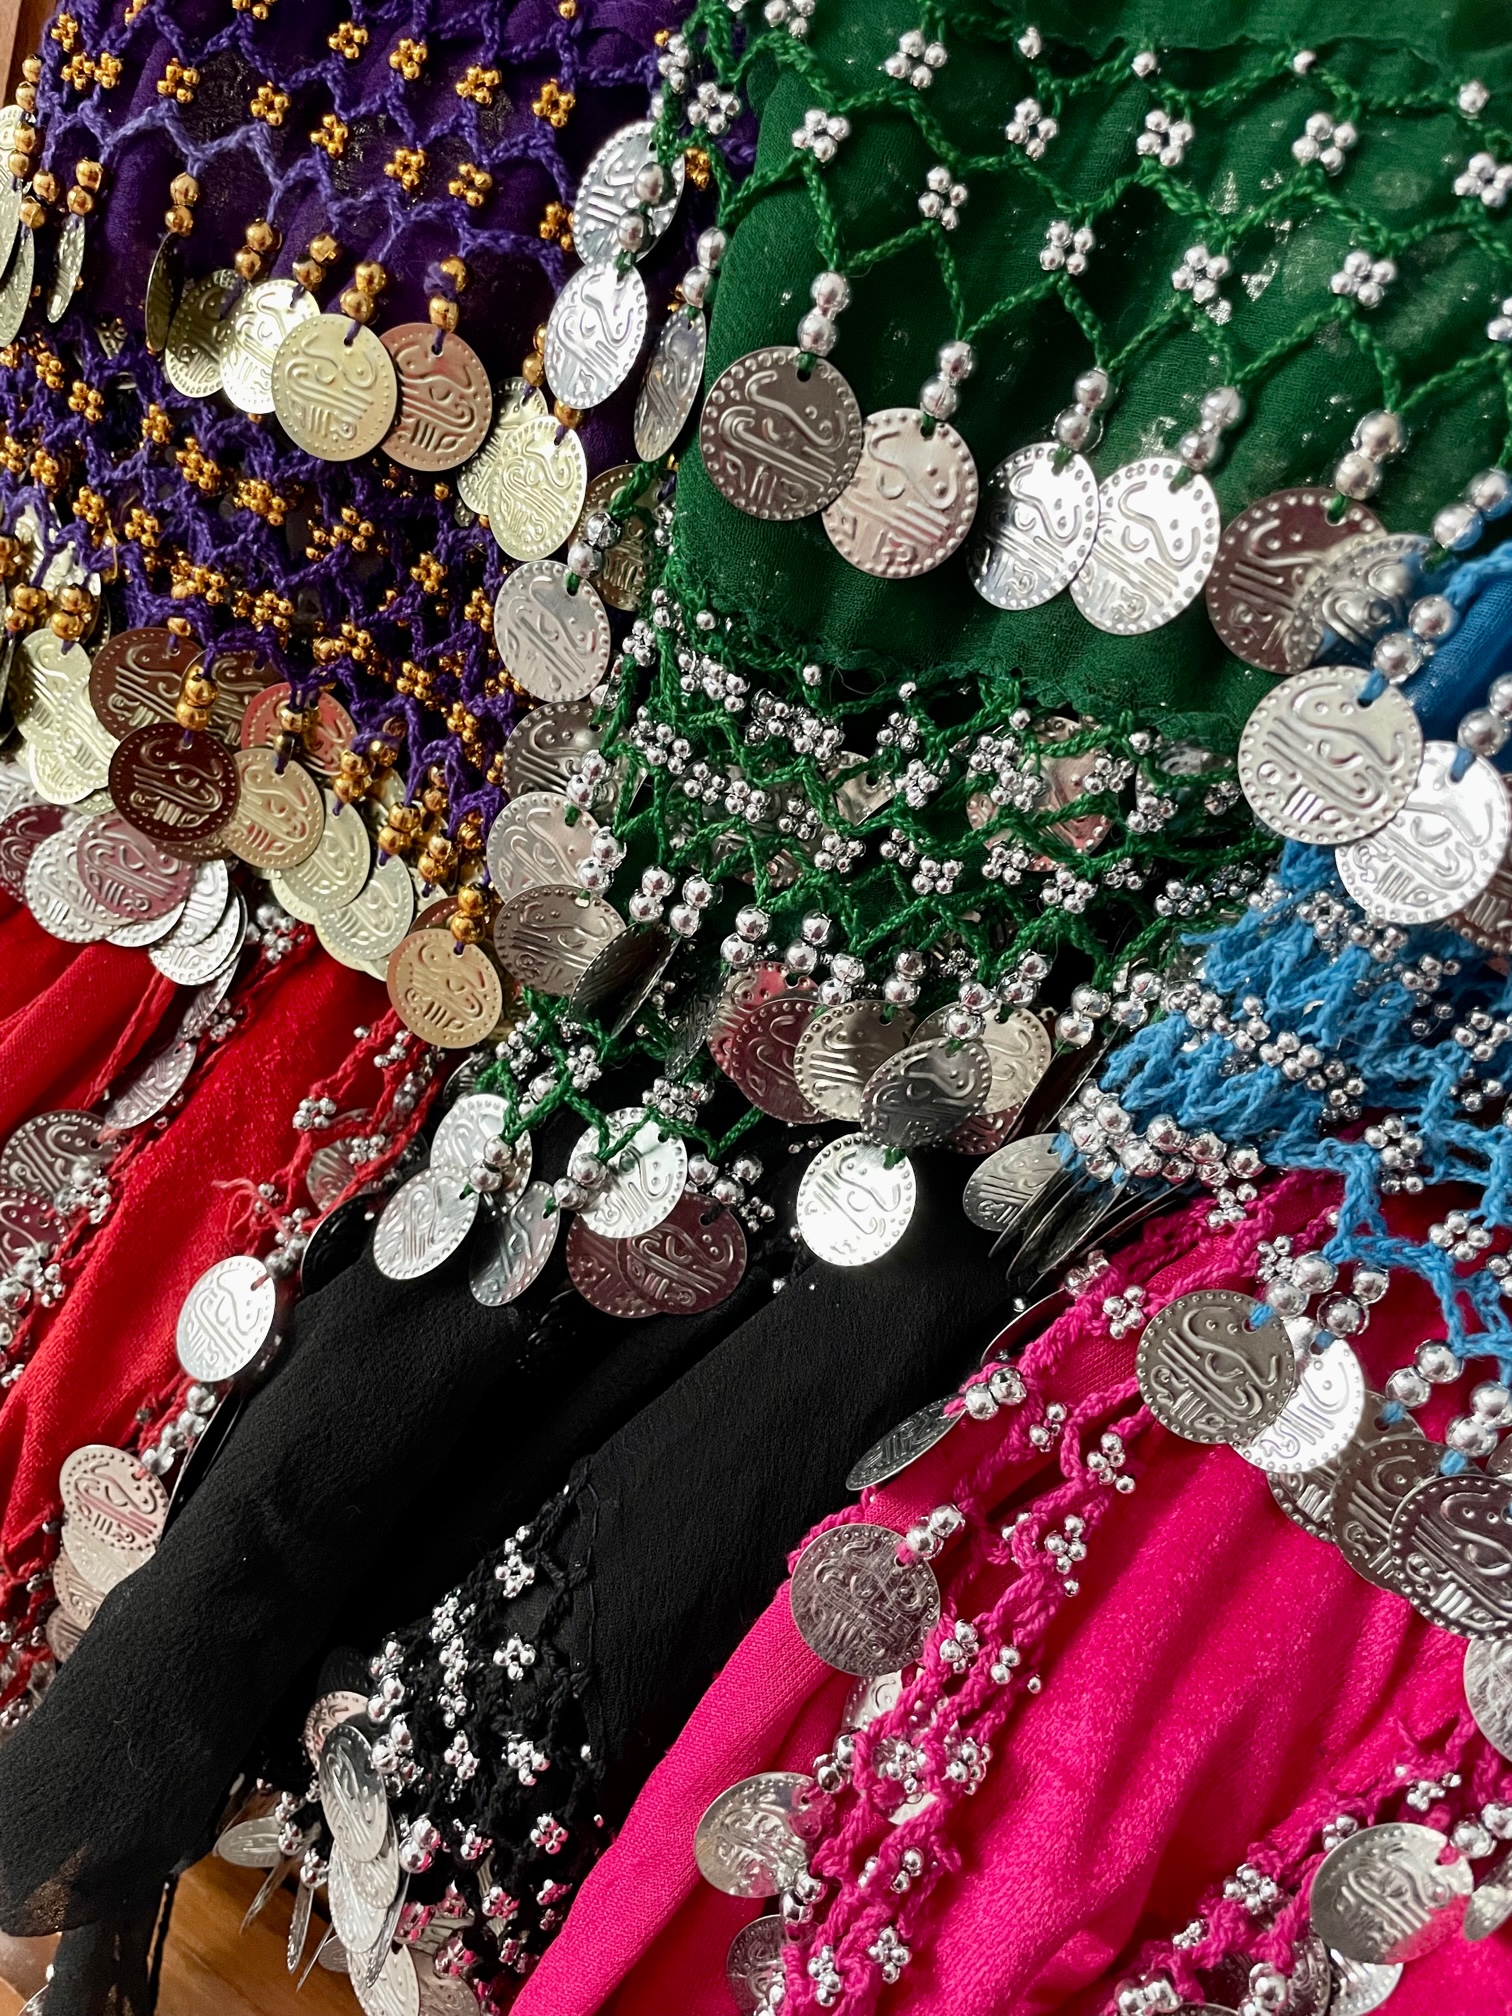 Lana has created a display of coin belts ready for a SharQui Bellydance fitness class.